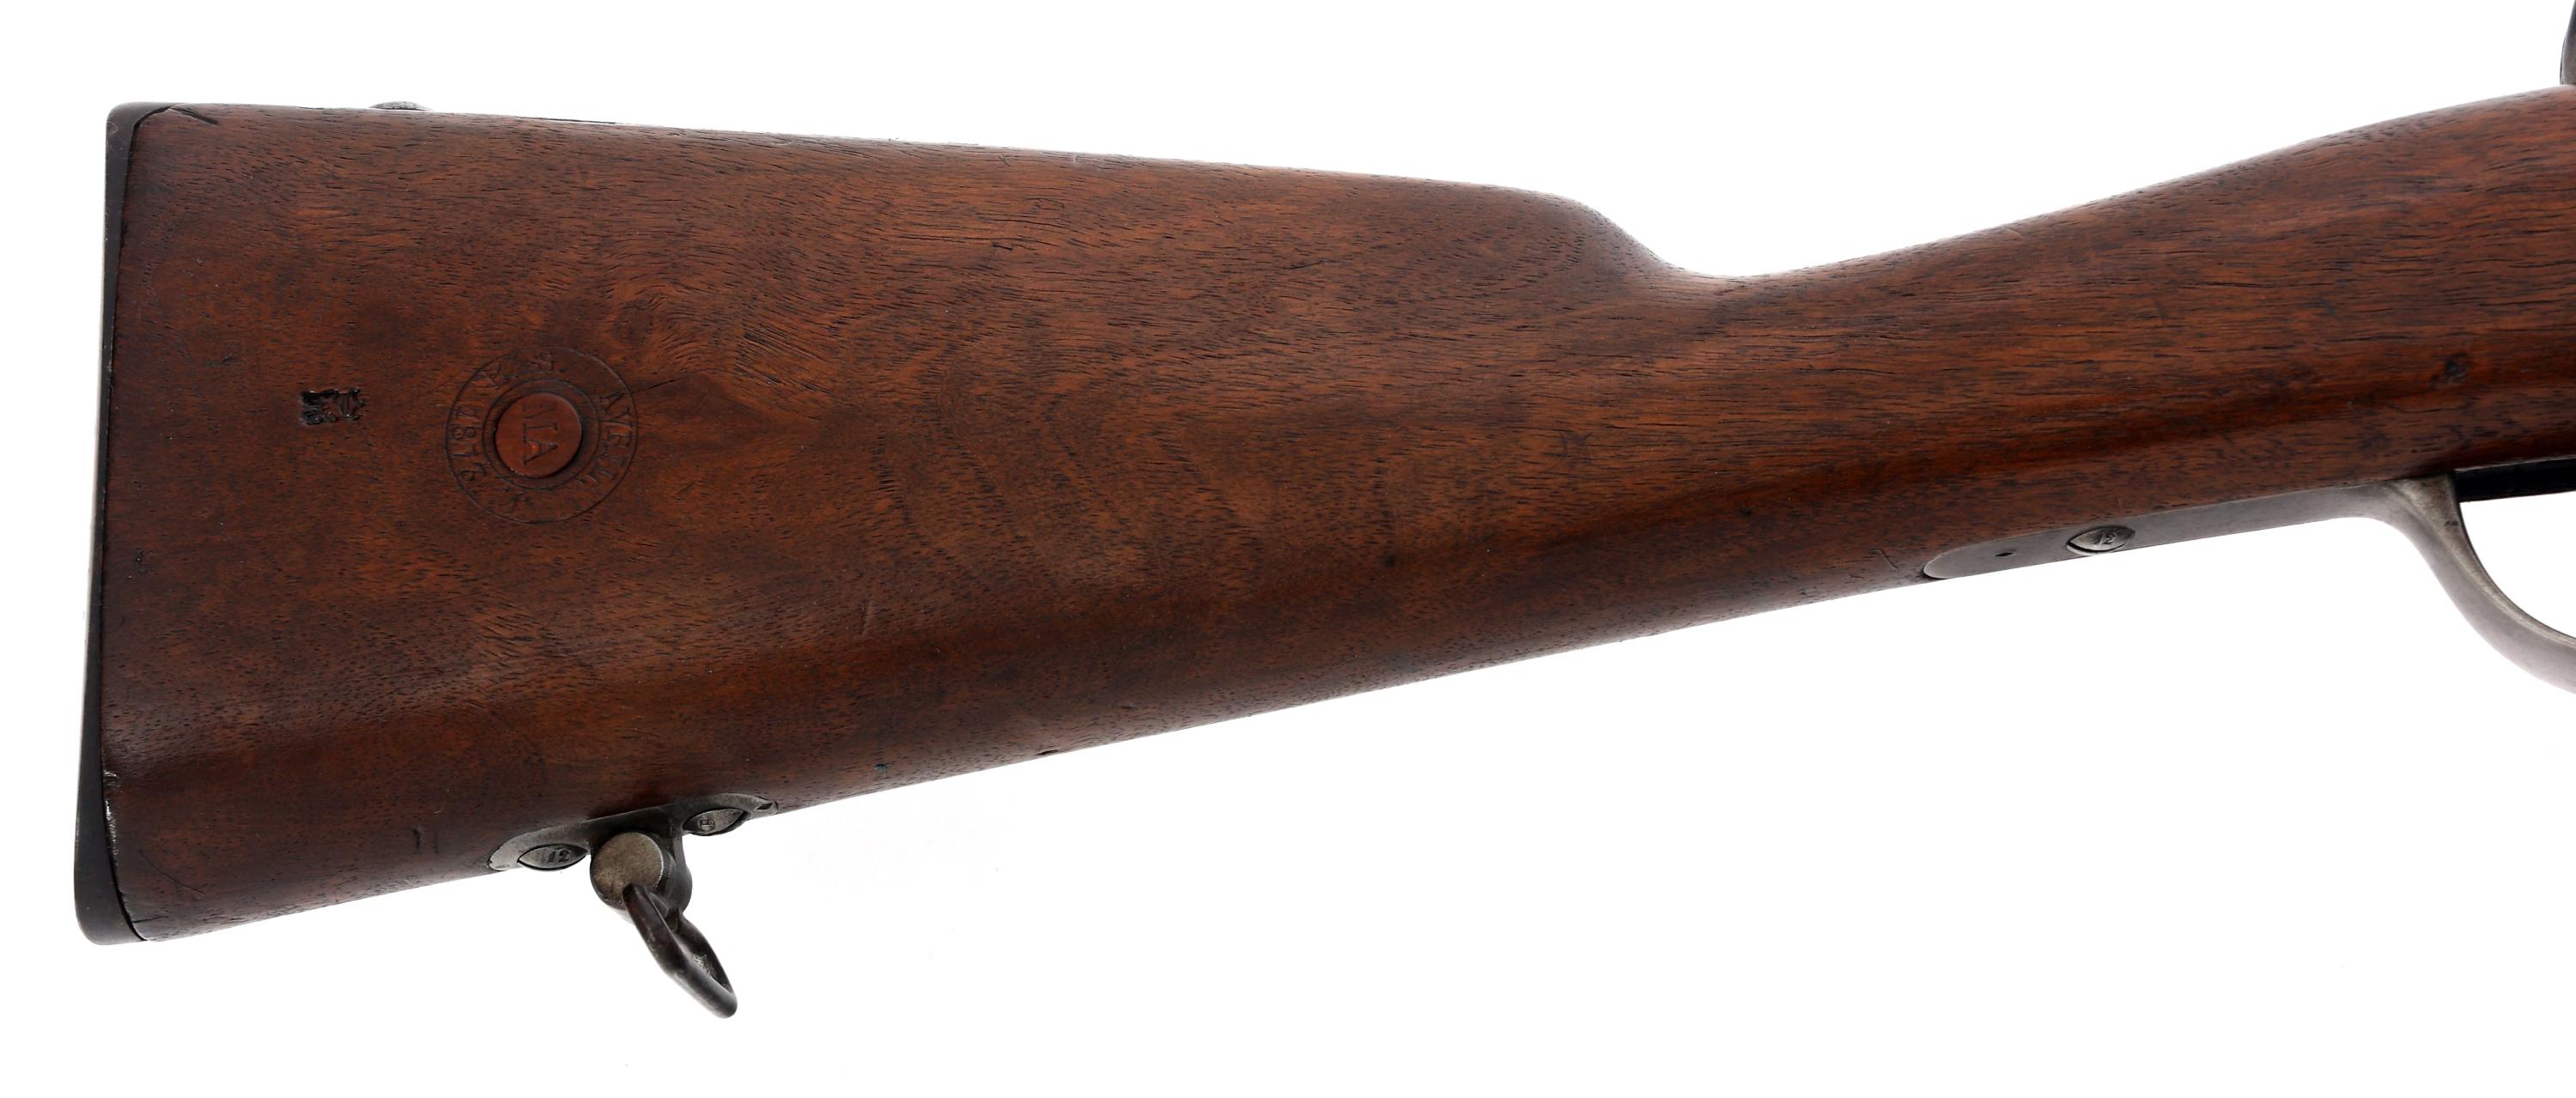 FRENCH ST ETIENNE MODEL 1866 11mm CALIBER RIFLE